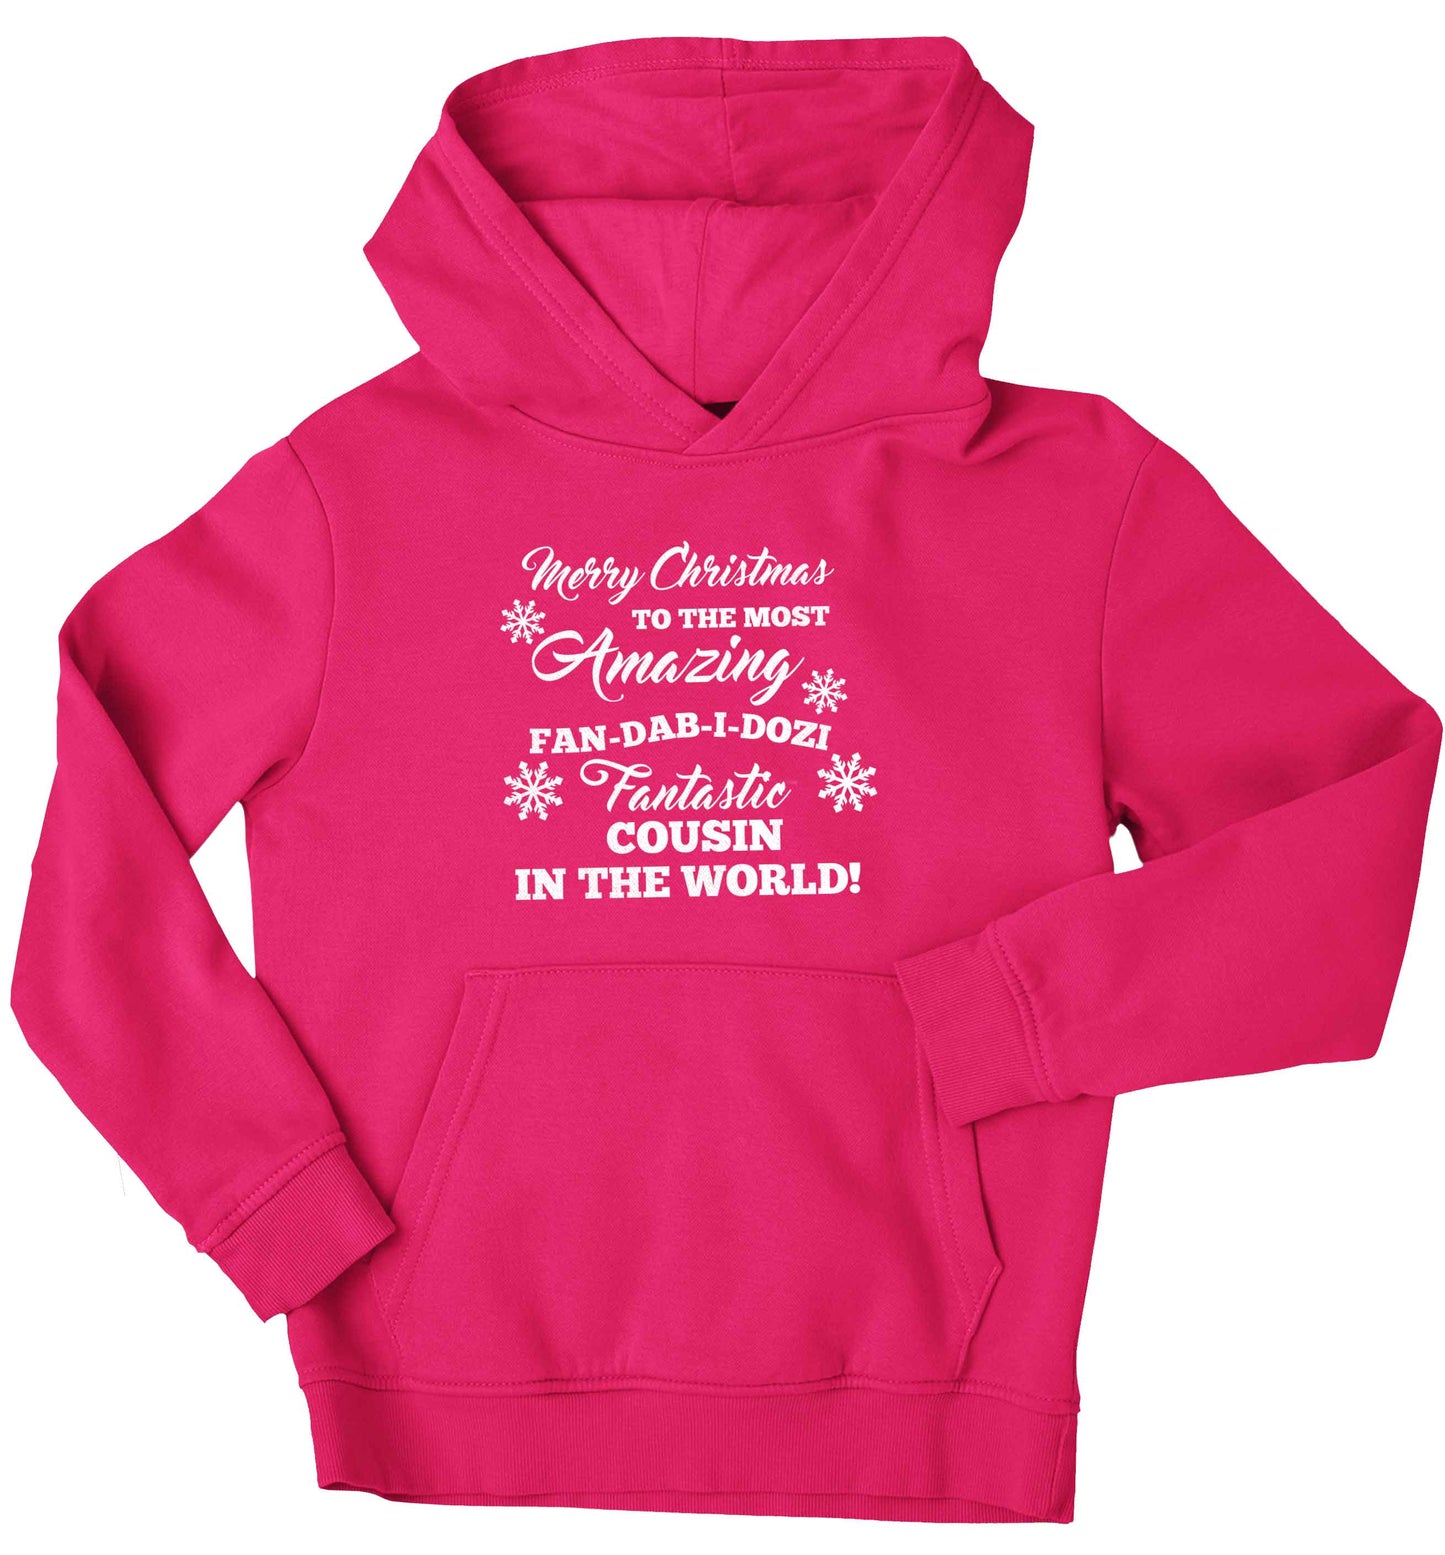 Merry Christmas to the most amazing fan-dab-i-dozi fantasic Cousin in the world children's pink hoodie 12-13 Years